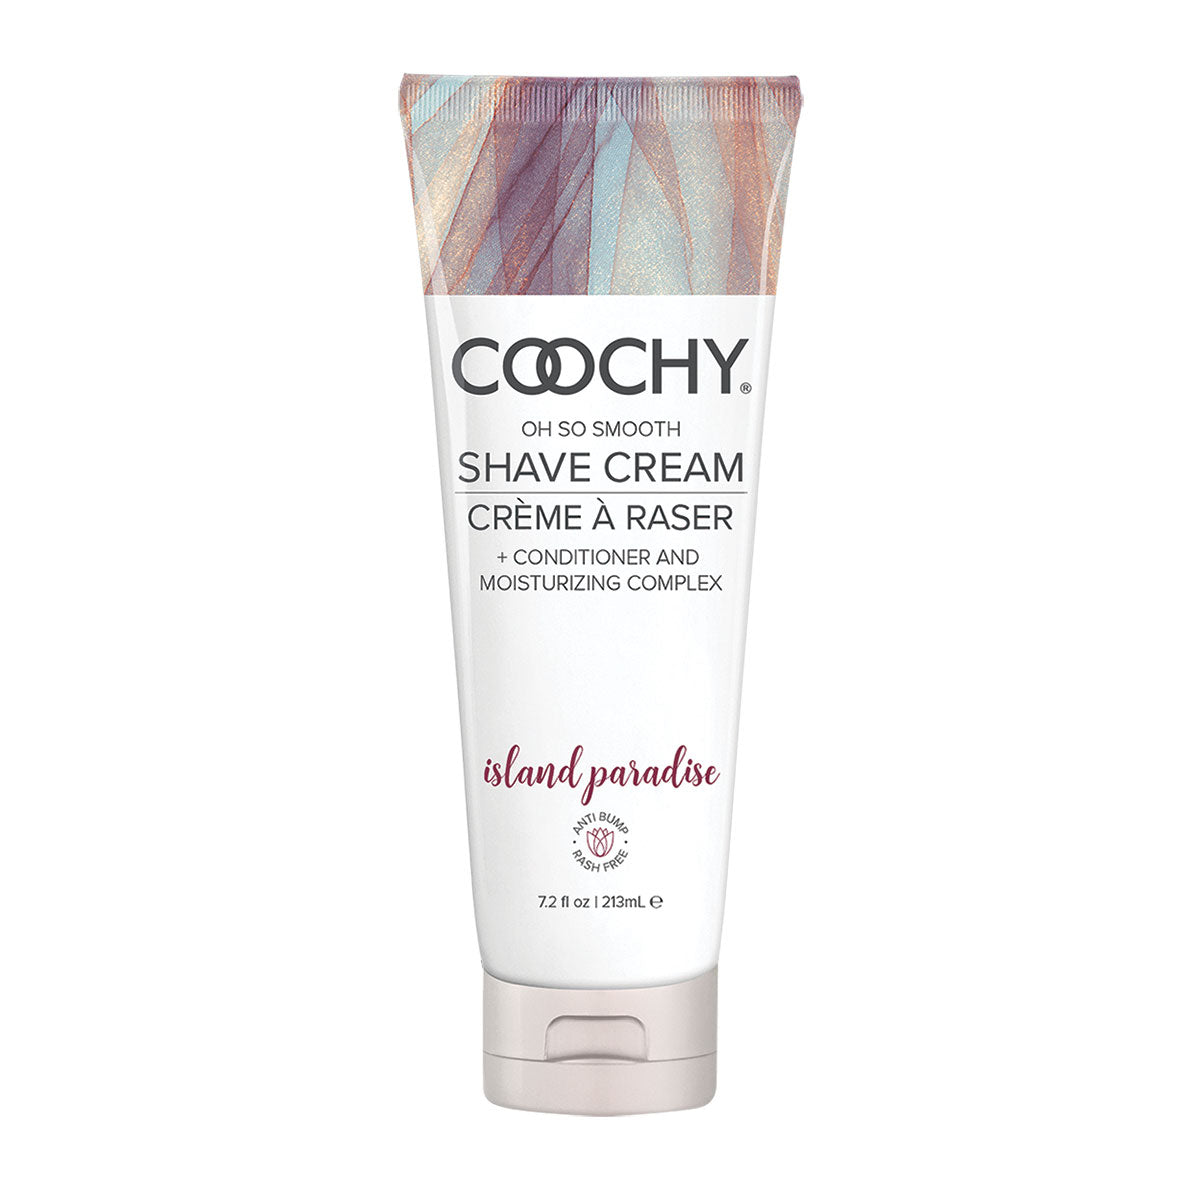 Coochy Shave Cream - 7.2oz - Assorted Scents